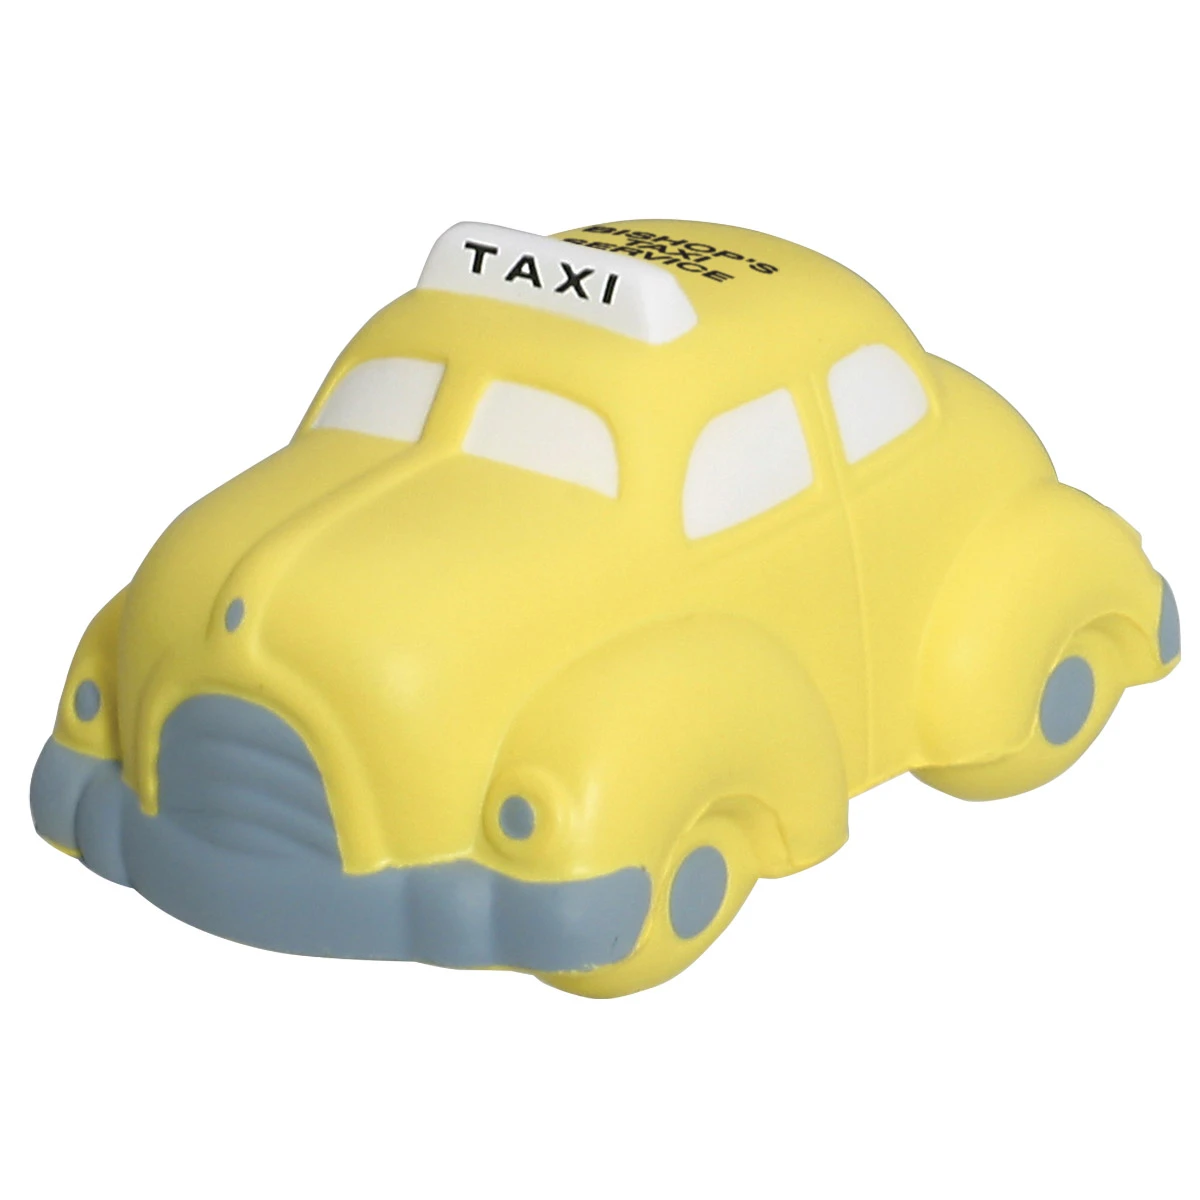 Promotional Taxi Stress Reliever